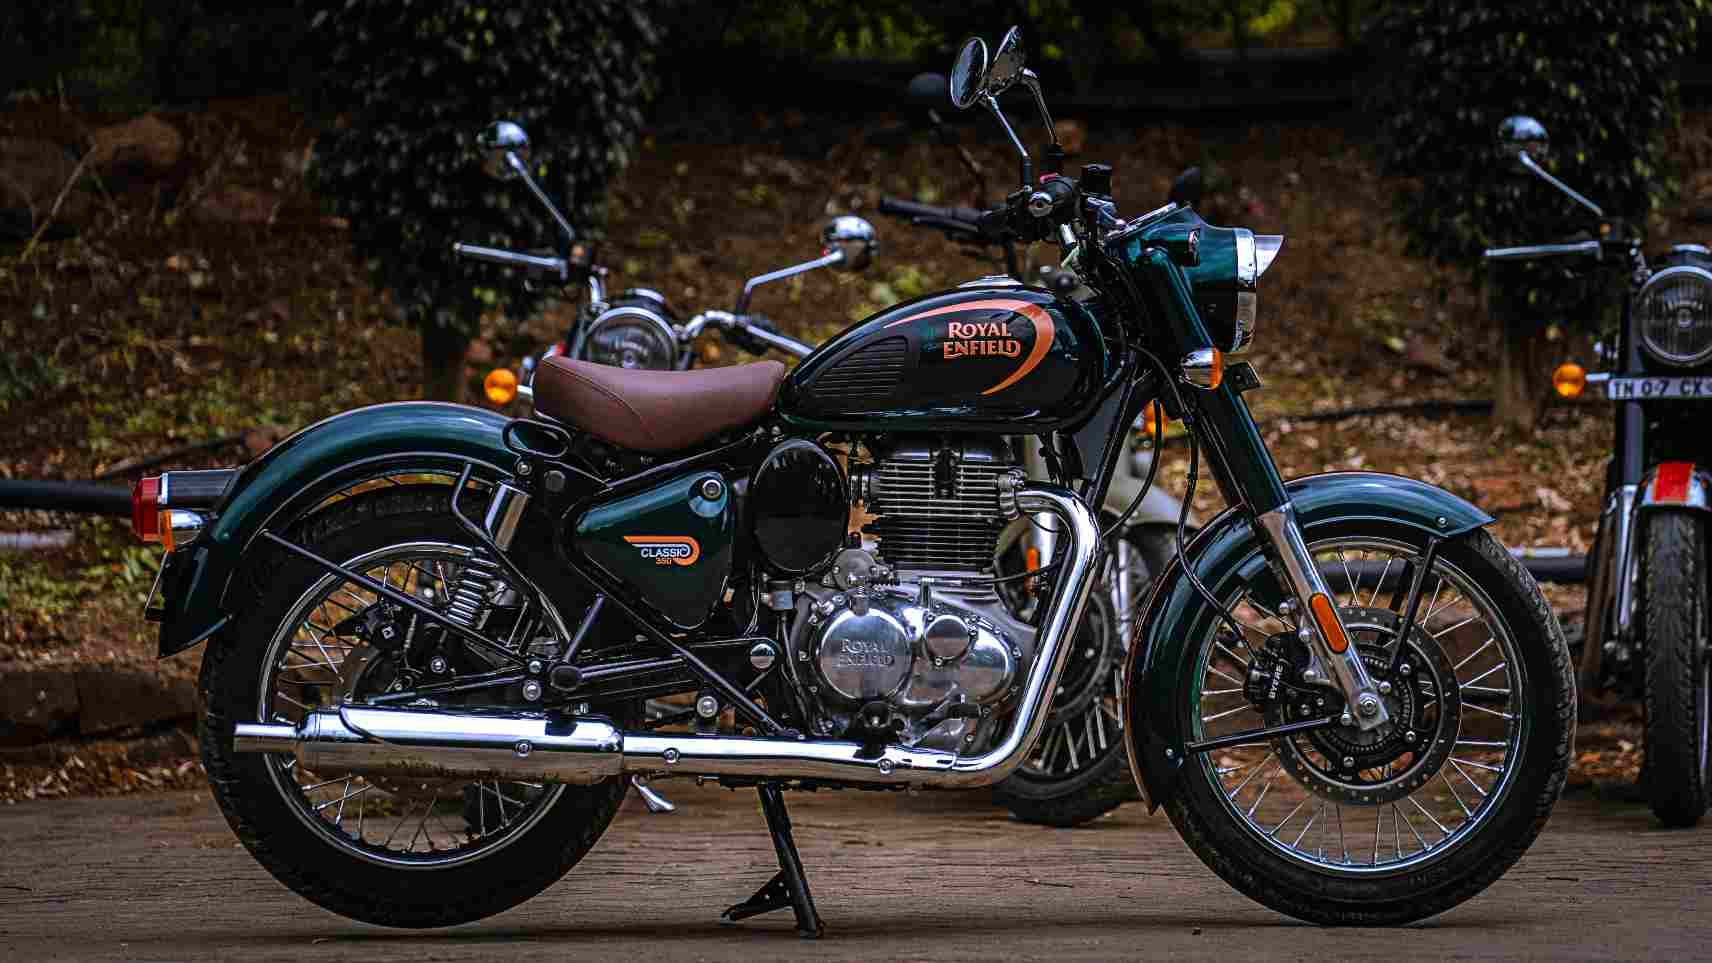 It may look familiar, but the new Classic 350 is a clear leap over its predecessor in terms of ability. Image: Royal Enfield